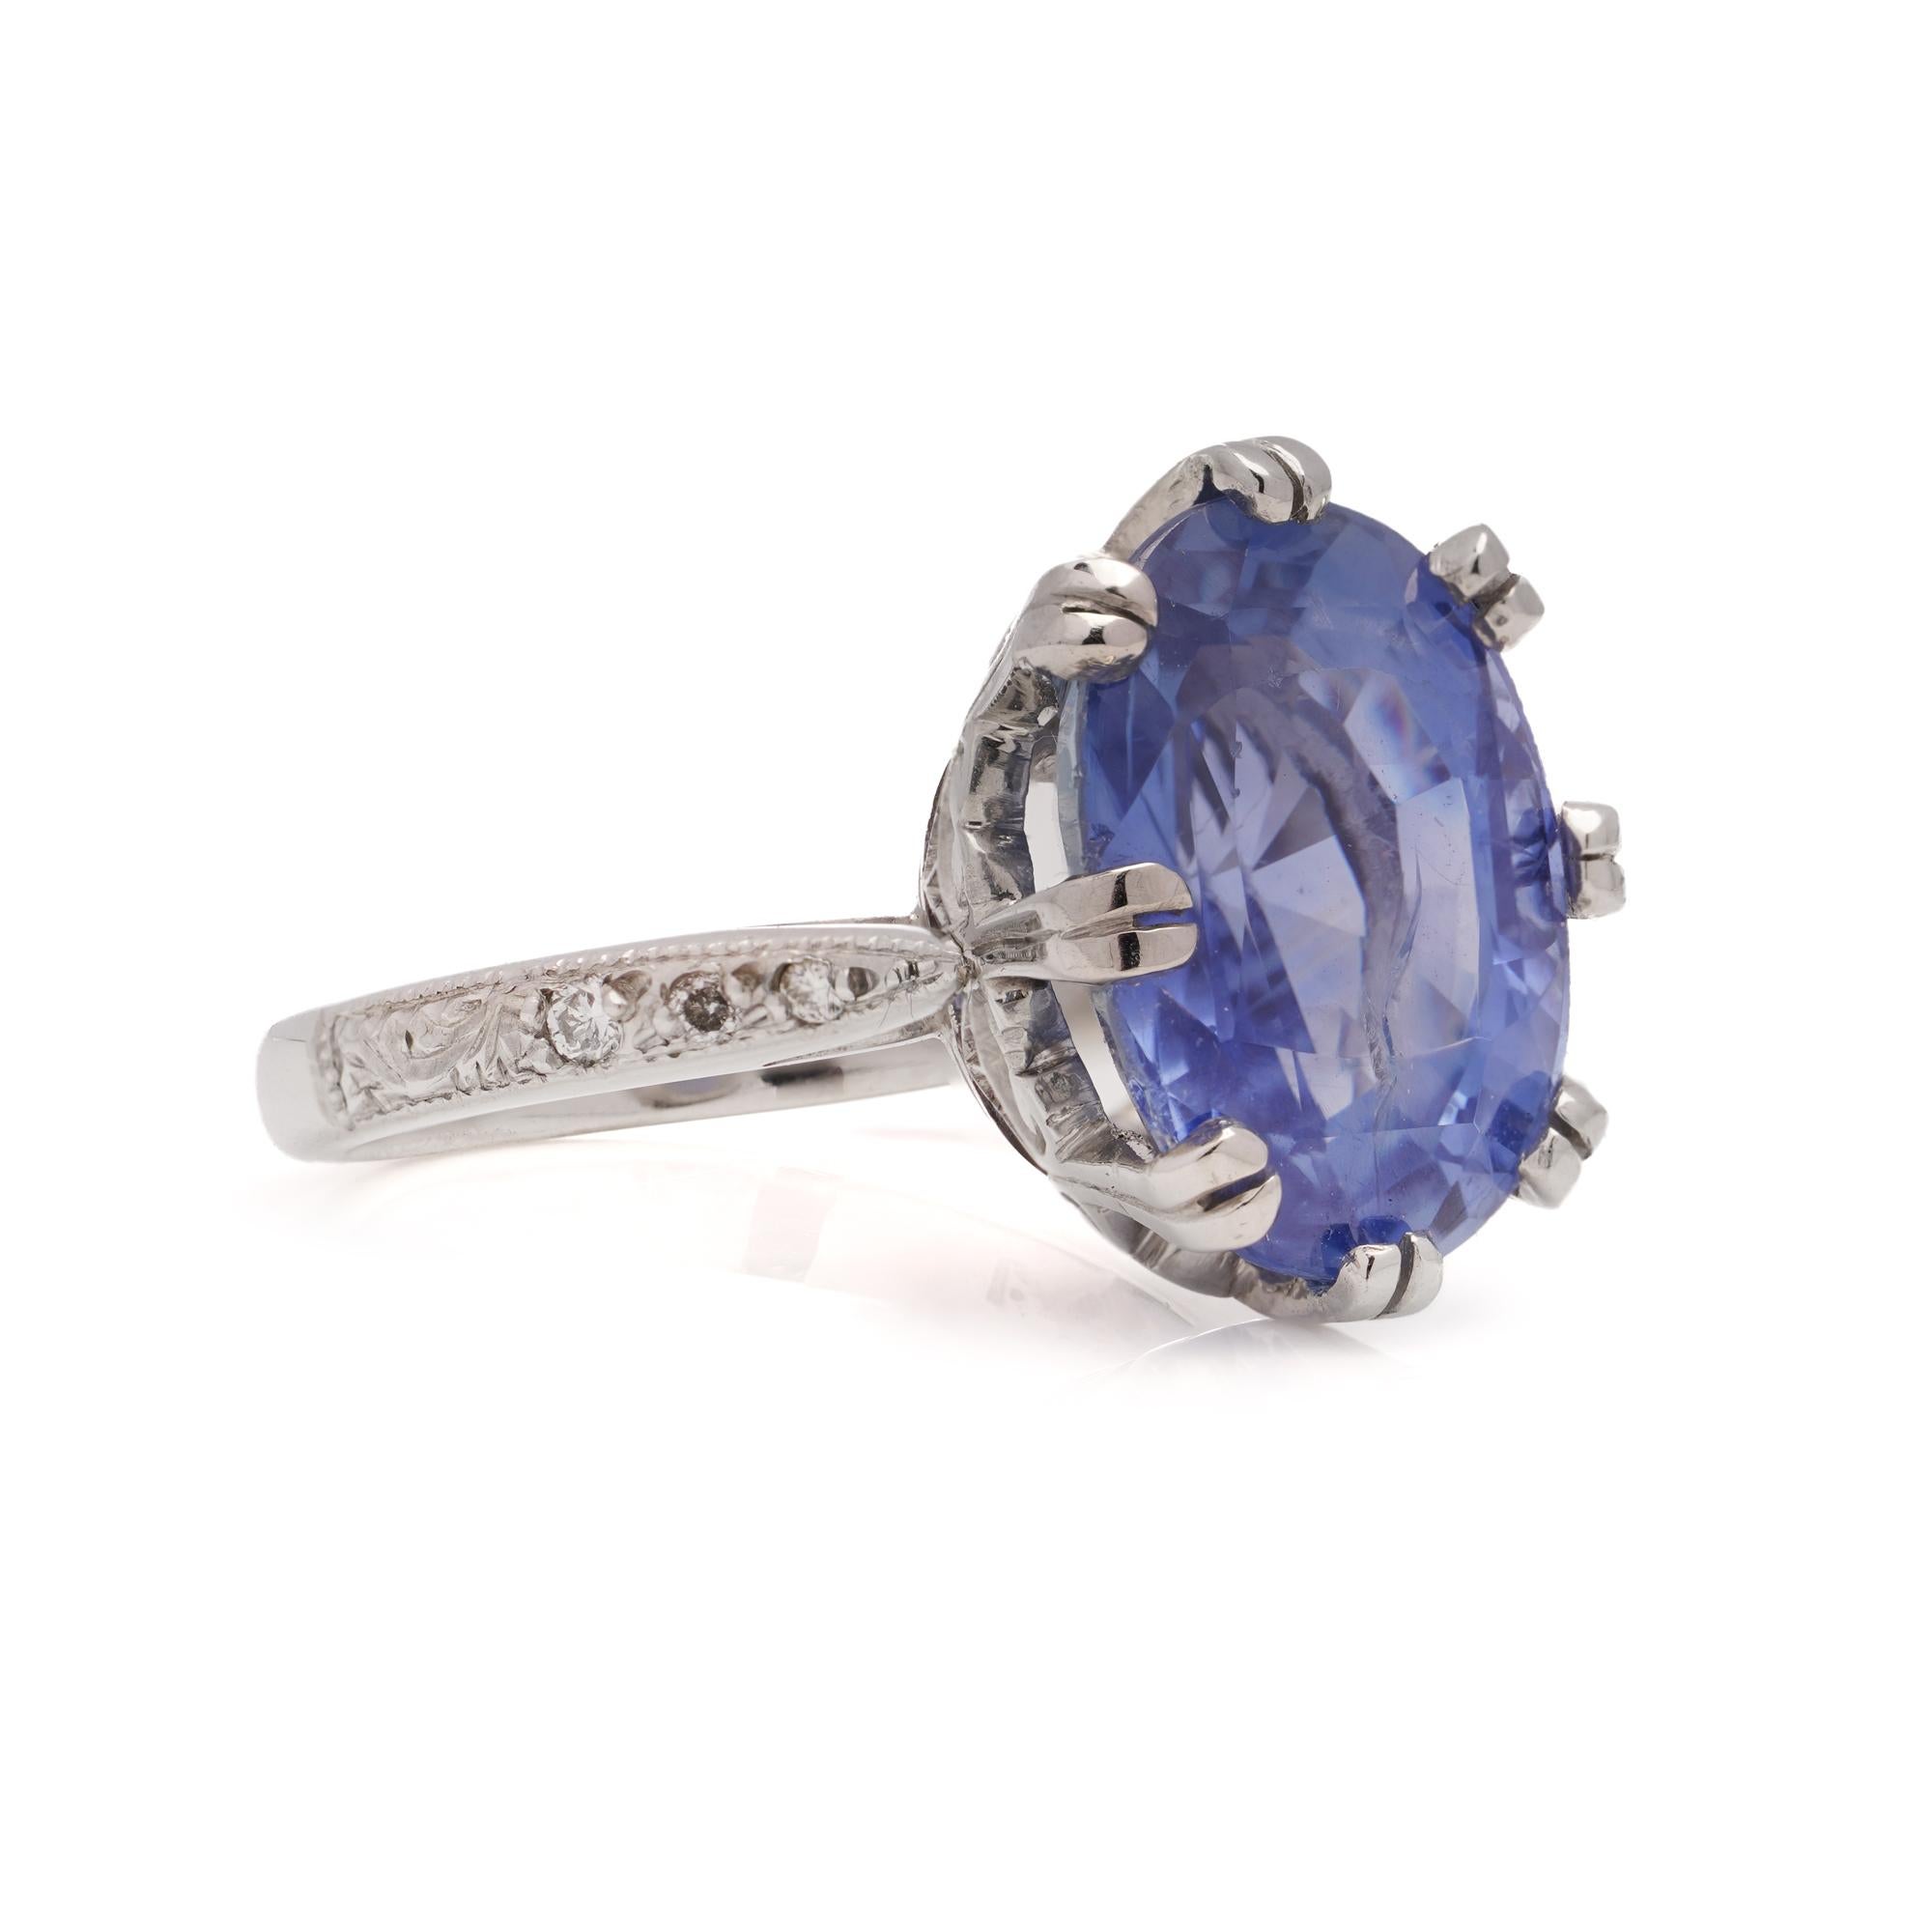 950 Platinum 5.50 carats of oval faceted sapphire and diamond ring For Sale 2